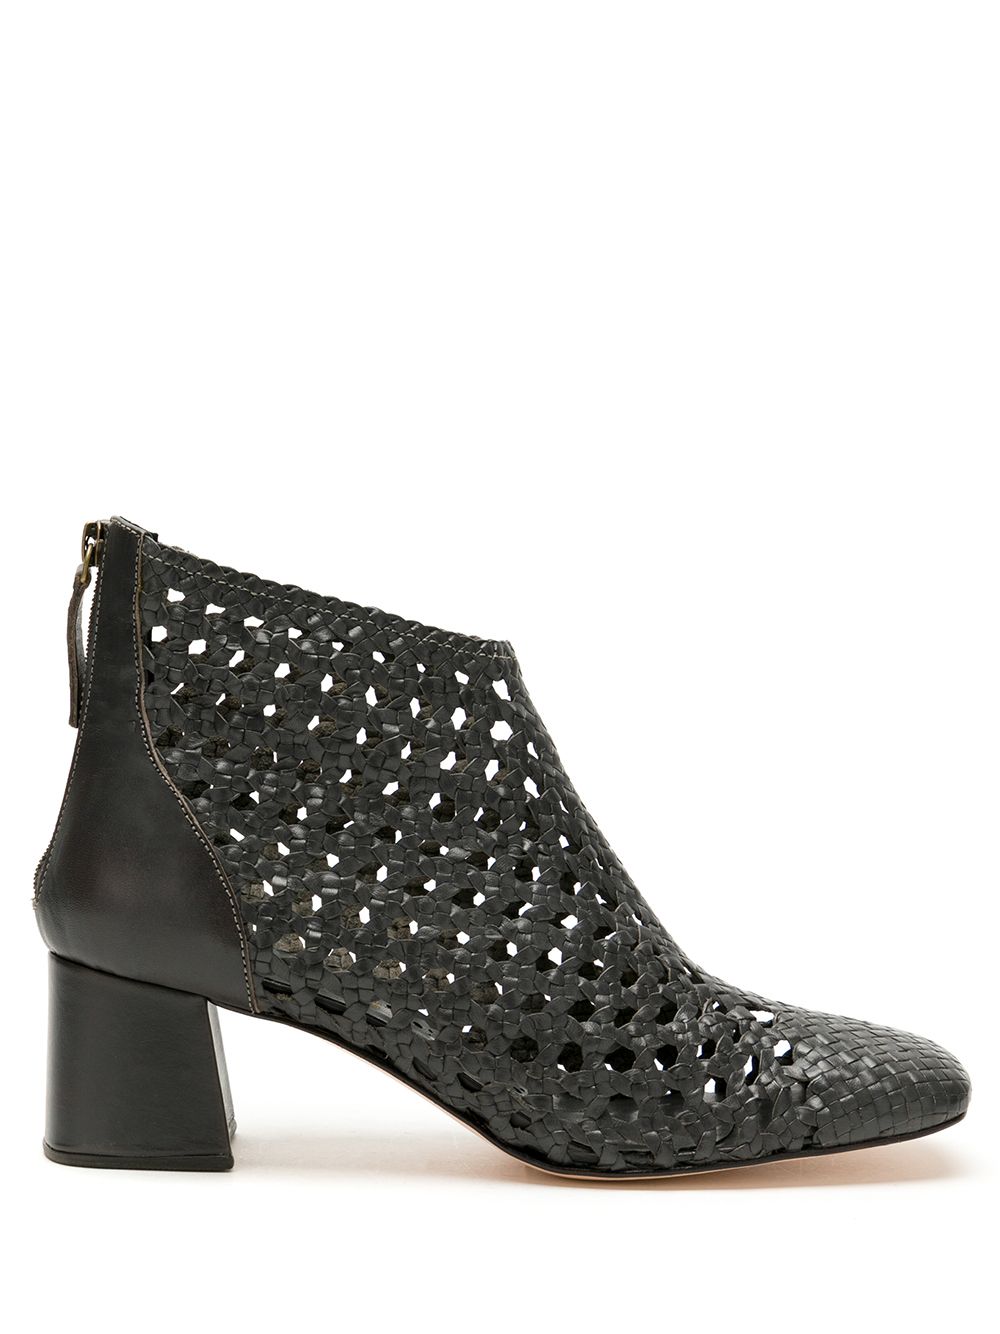 Sarah Chofakian Happiness Cut Out Leather Boots - Farfetch